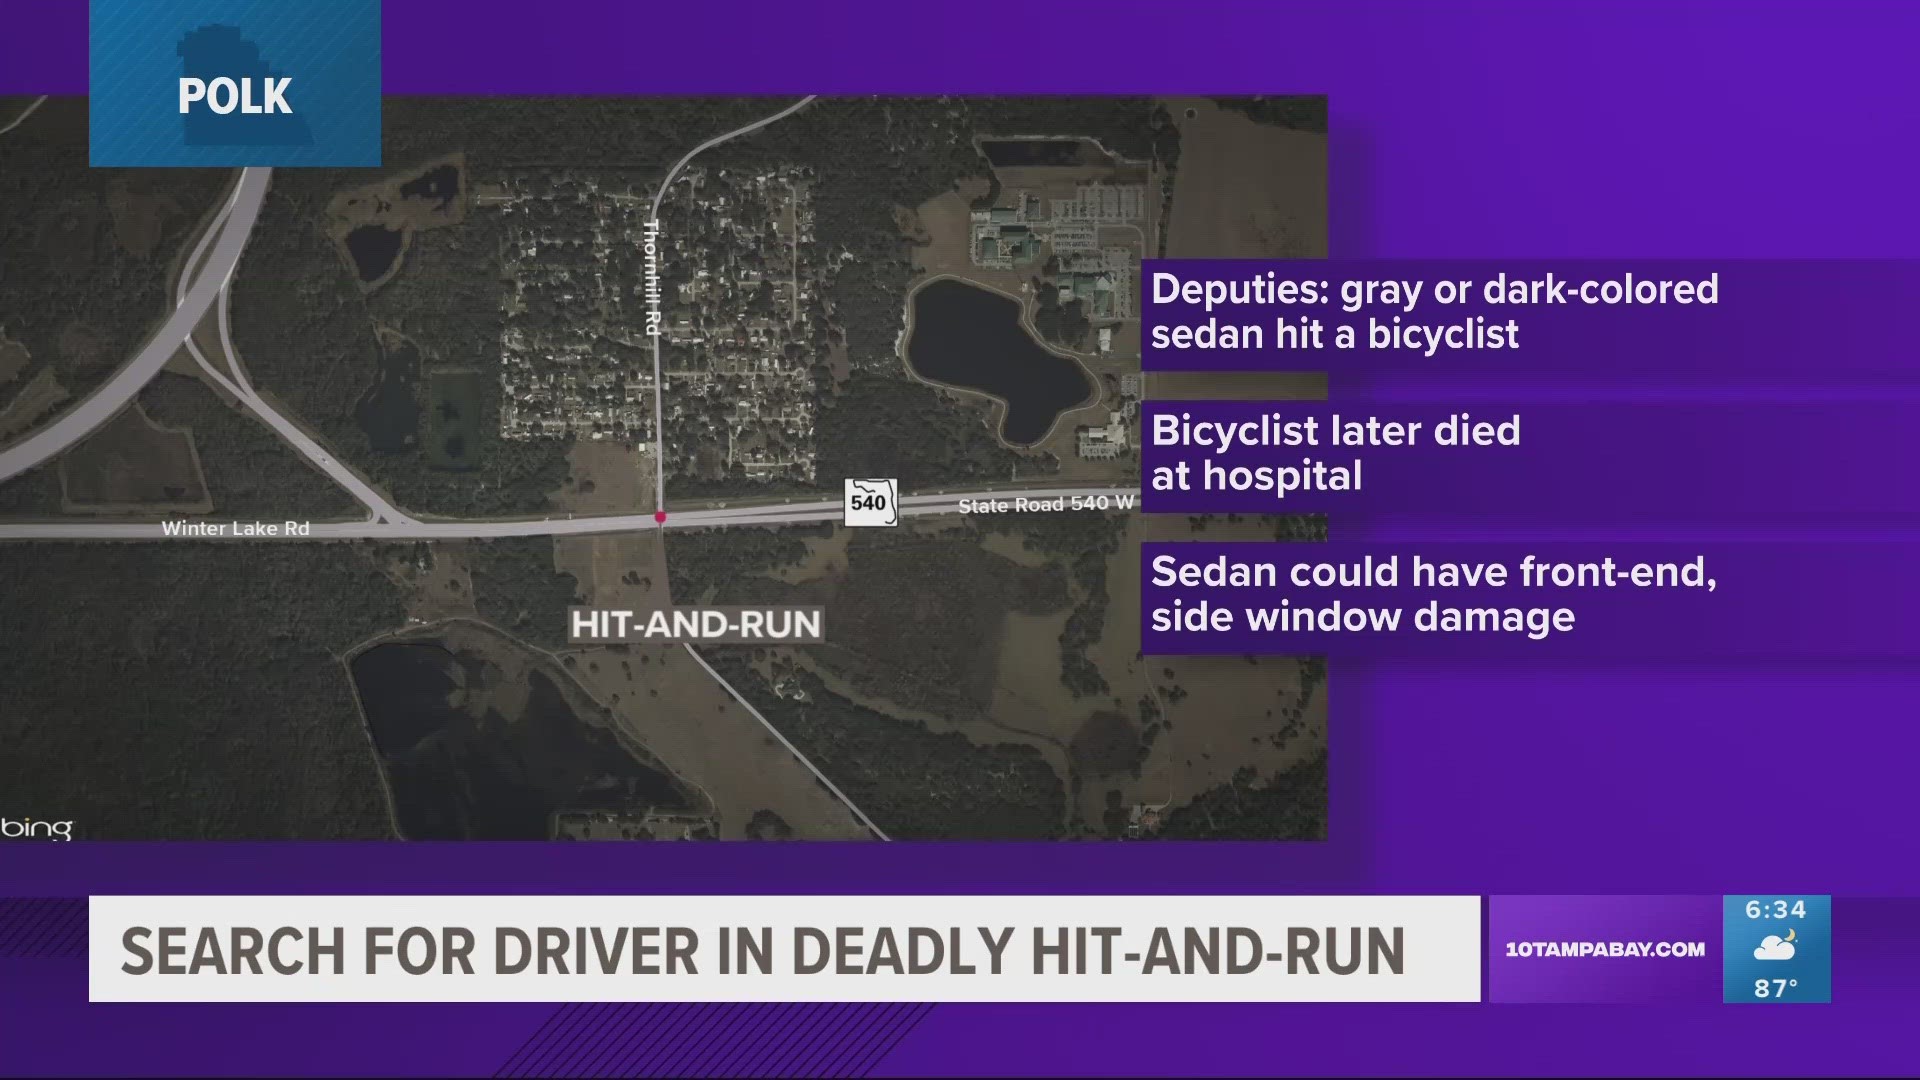 PCSO says a gray or dark-colored sedan hit a bicyclist and fled the scene.